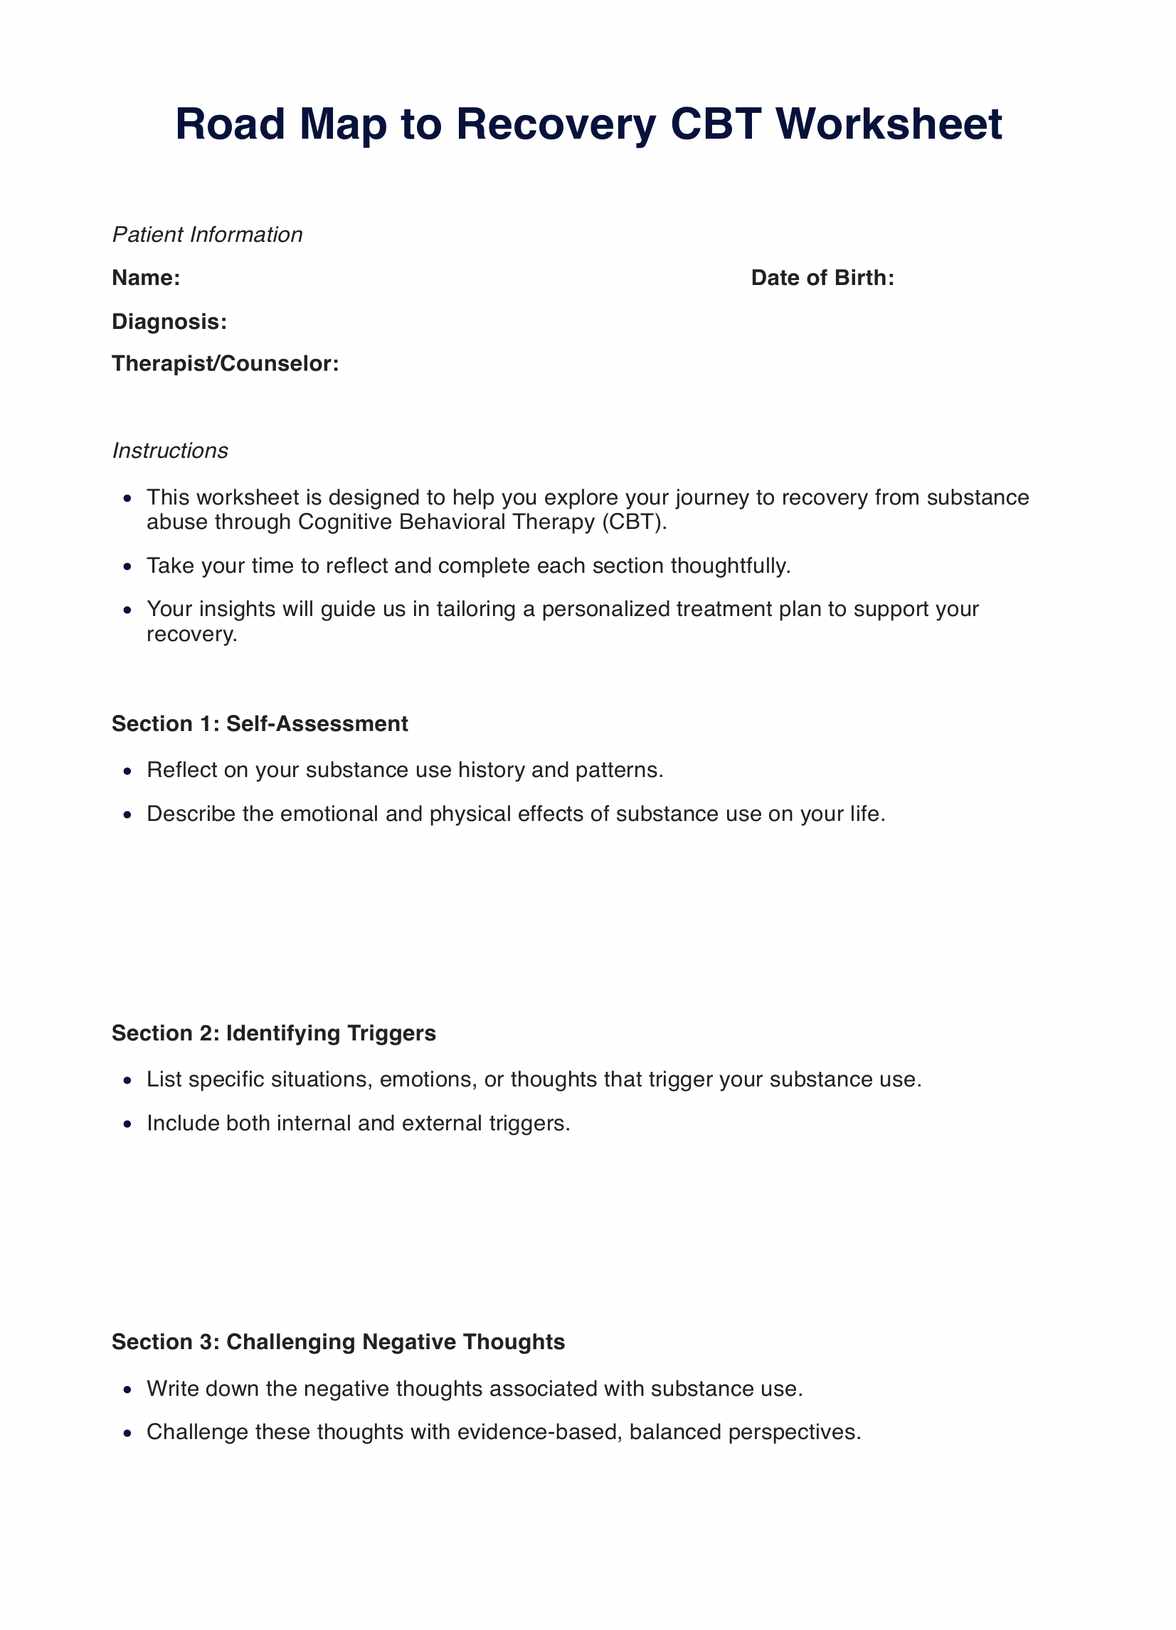 Road Map to Recovery CBT Worksheet PDF Example